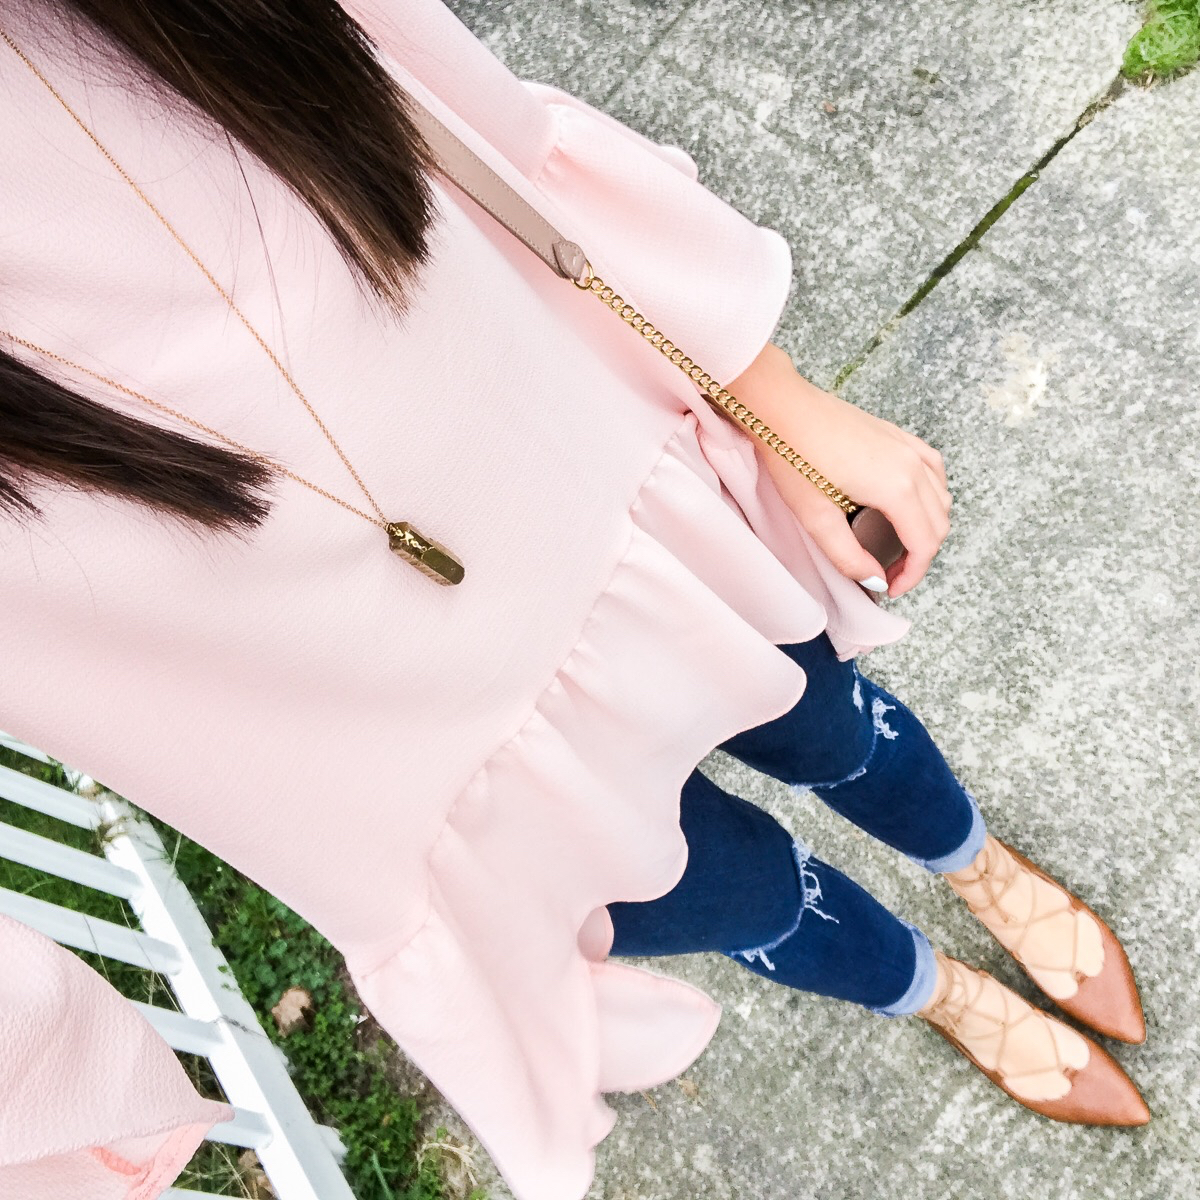 Ruffle hem top, outfit of the day, casual cute outfit, spring style, petite fashion blog